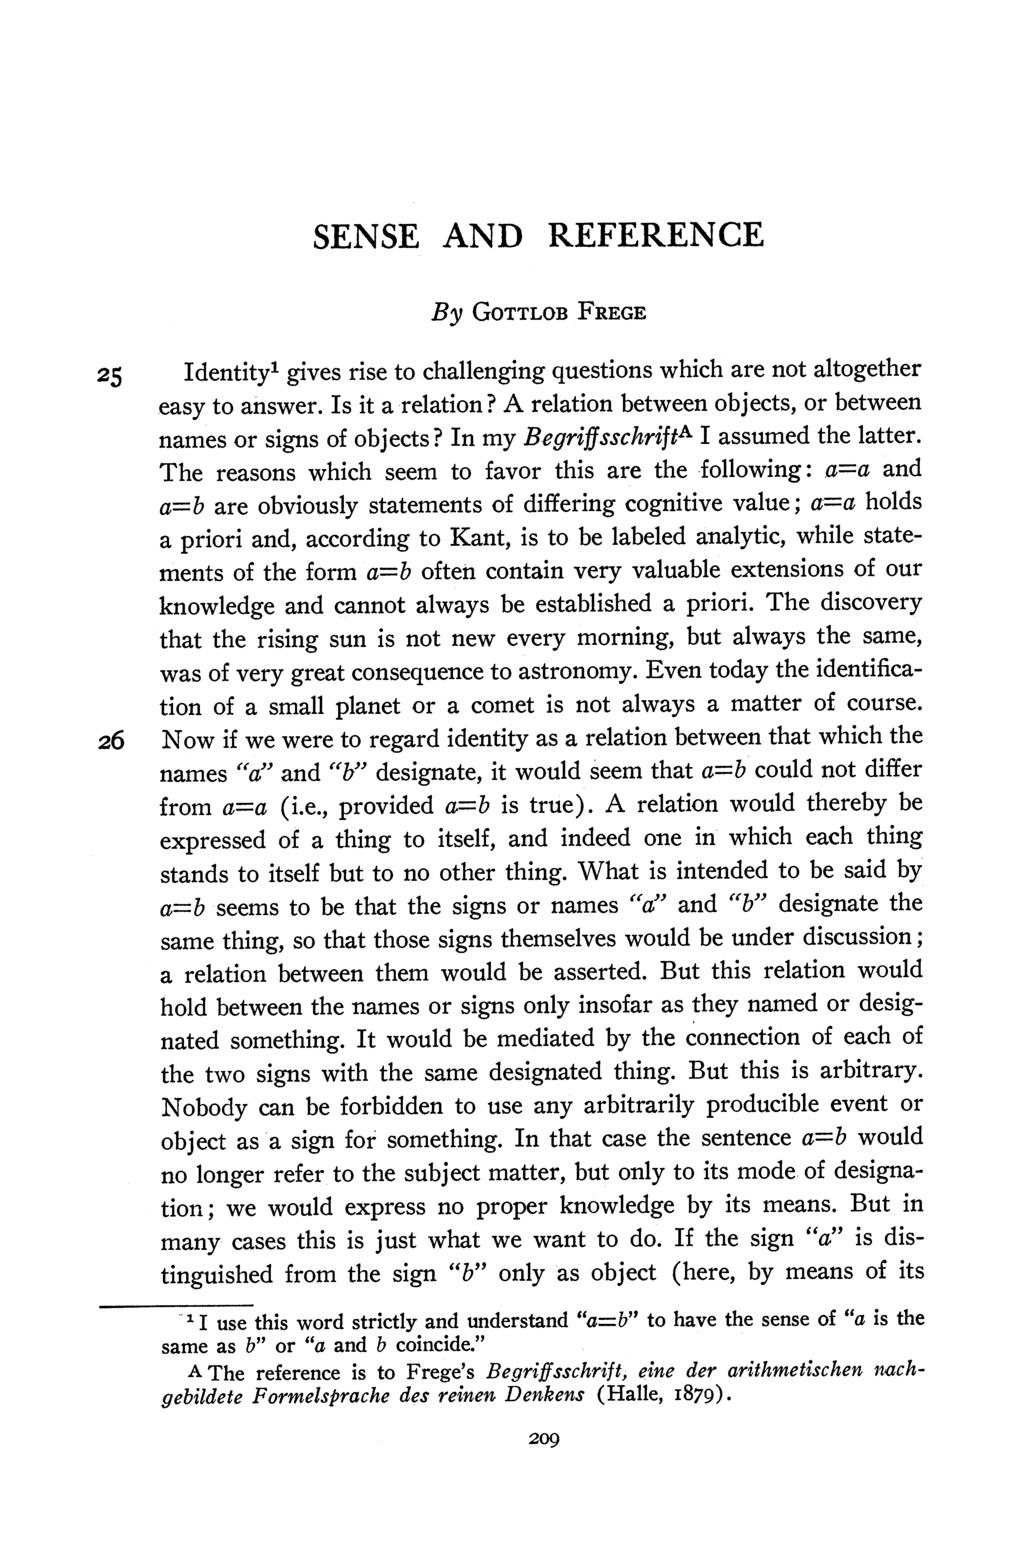 SENSE AND REFERENCE By GOTTLOB FREGE 25 Identity1 gives rise to challenging questions which are not altogether easy to answer. Is it a relation?